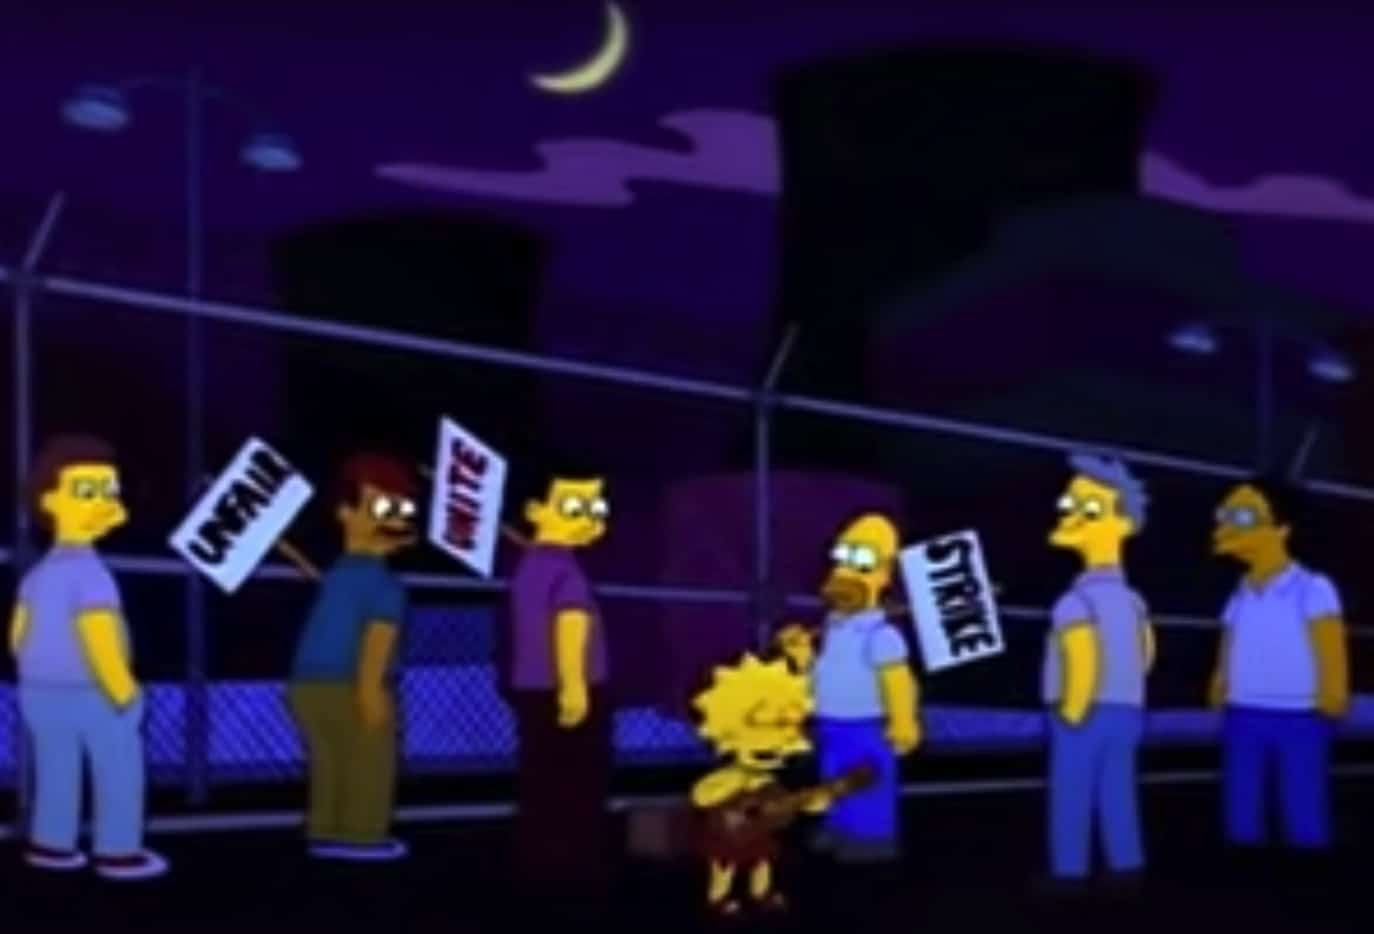 Simpsons episode where Homer goes on strike broadcasted on ‘Walkout Wednesday’